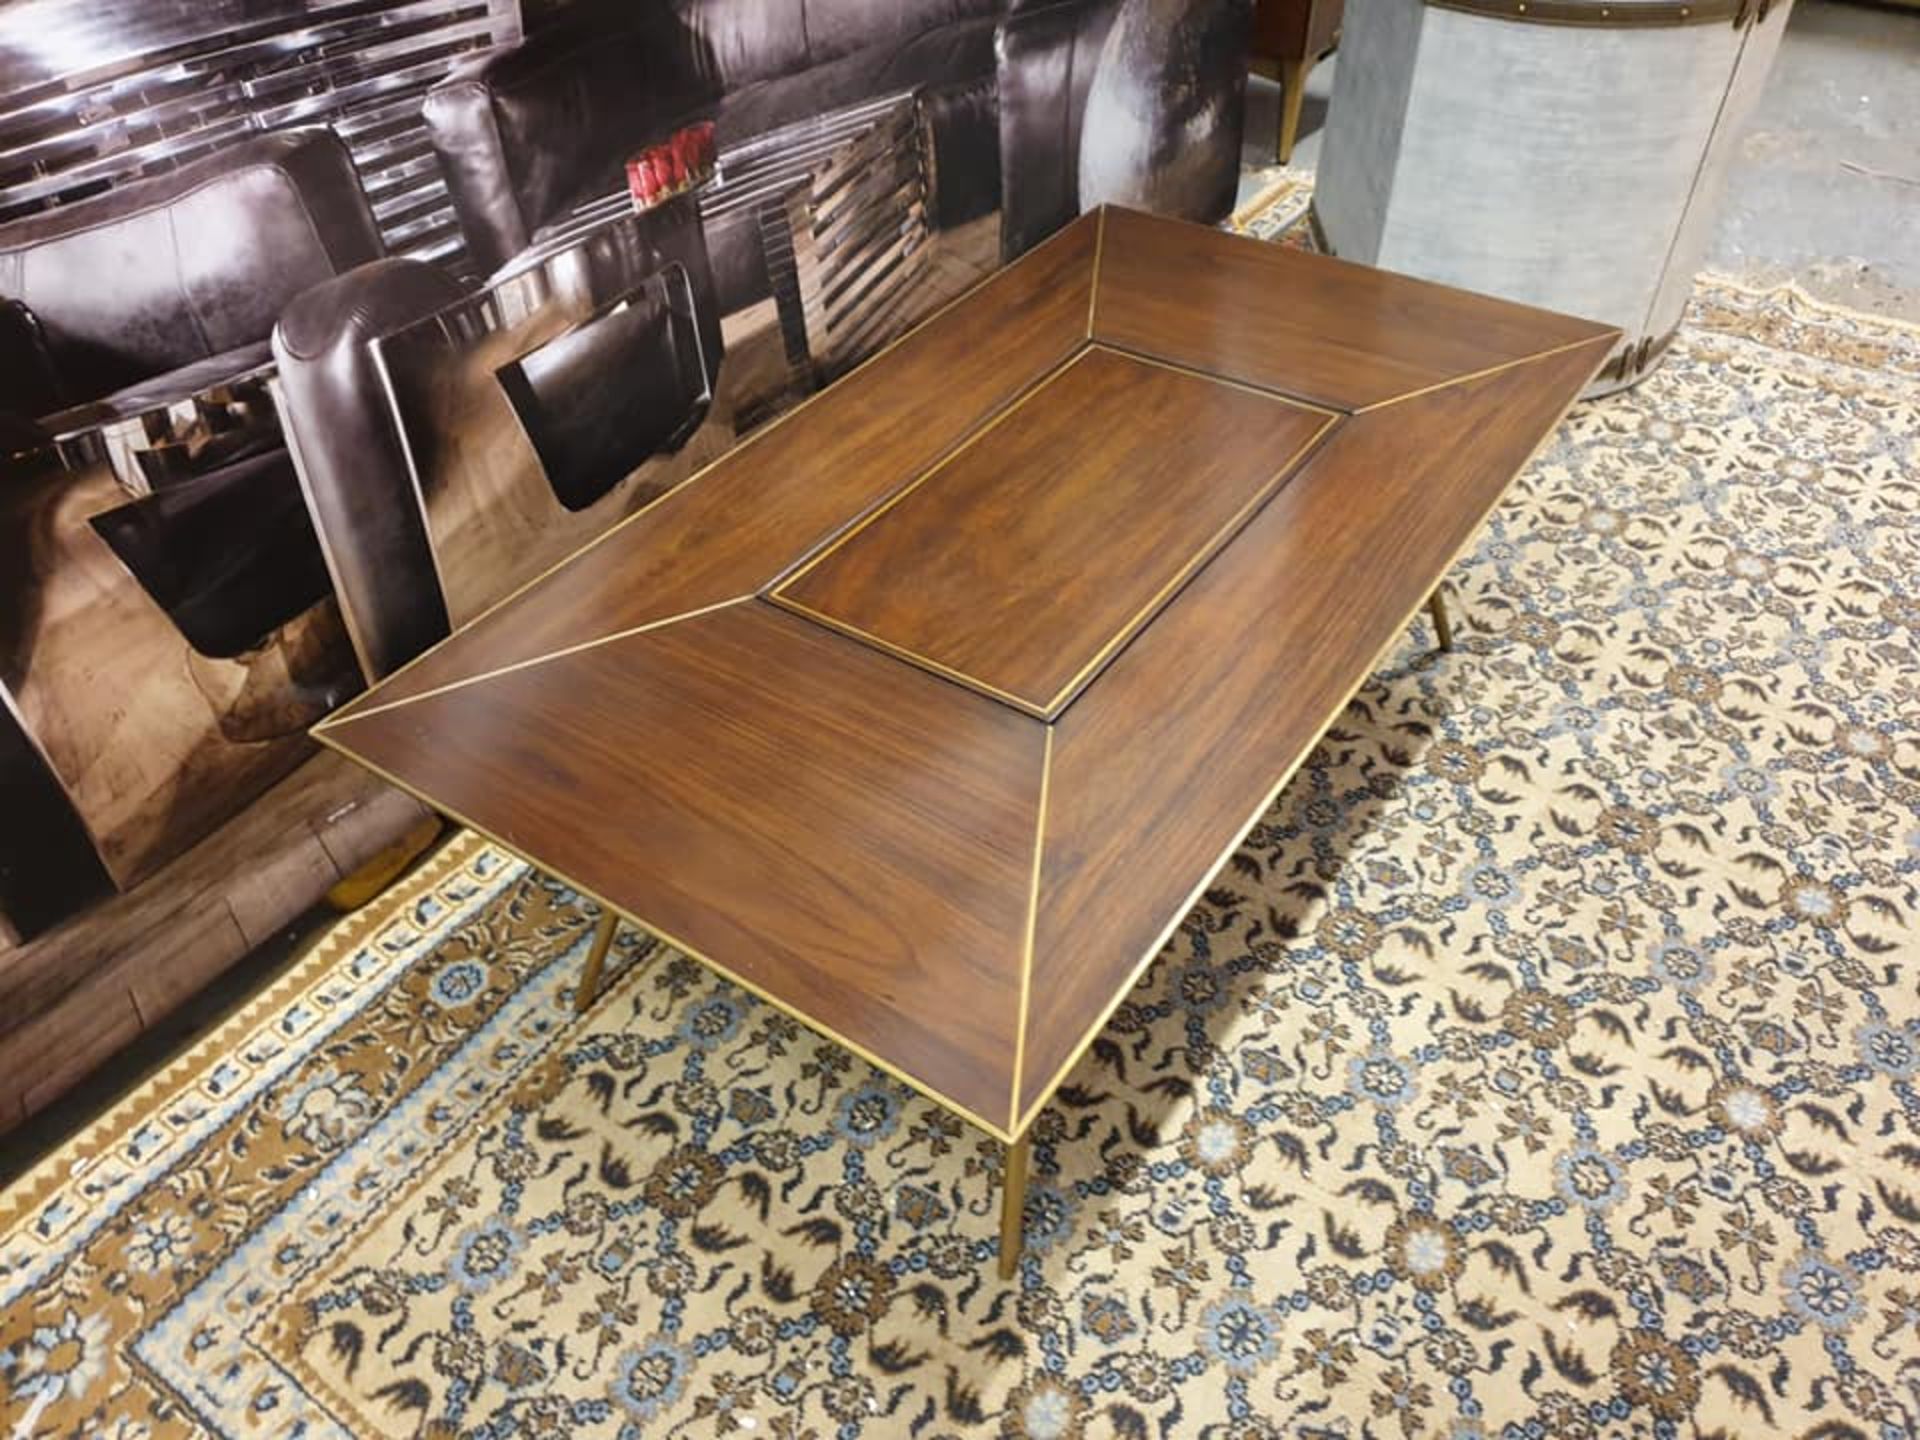 Starbay Acacia Walnut And Brass Inlay Rectangular Coffee Table Designed With Beautiful Clean Lines - Image 3 of 3